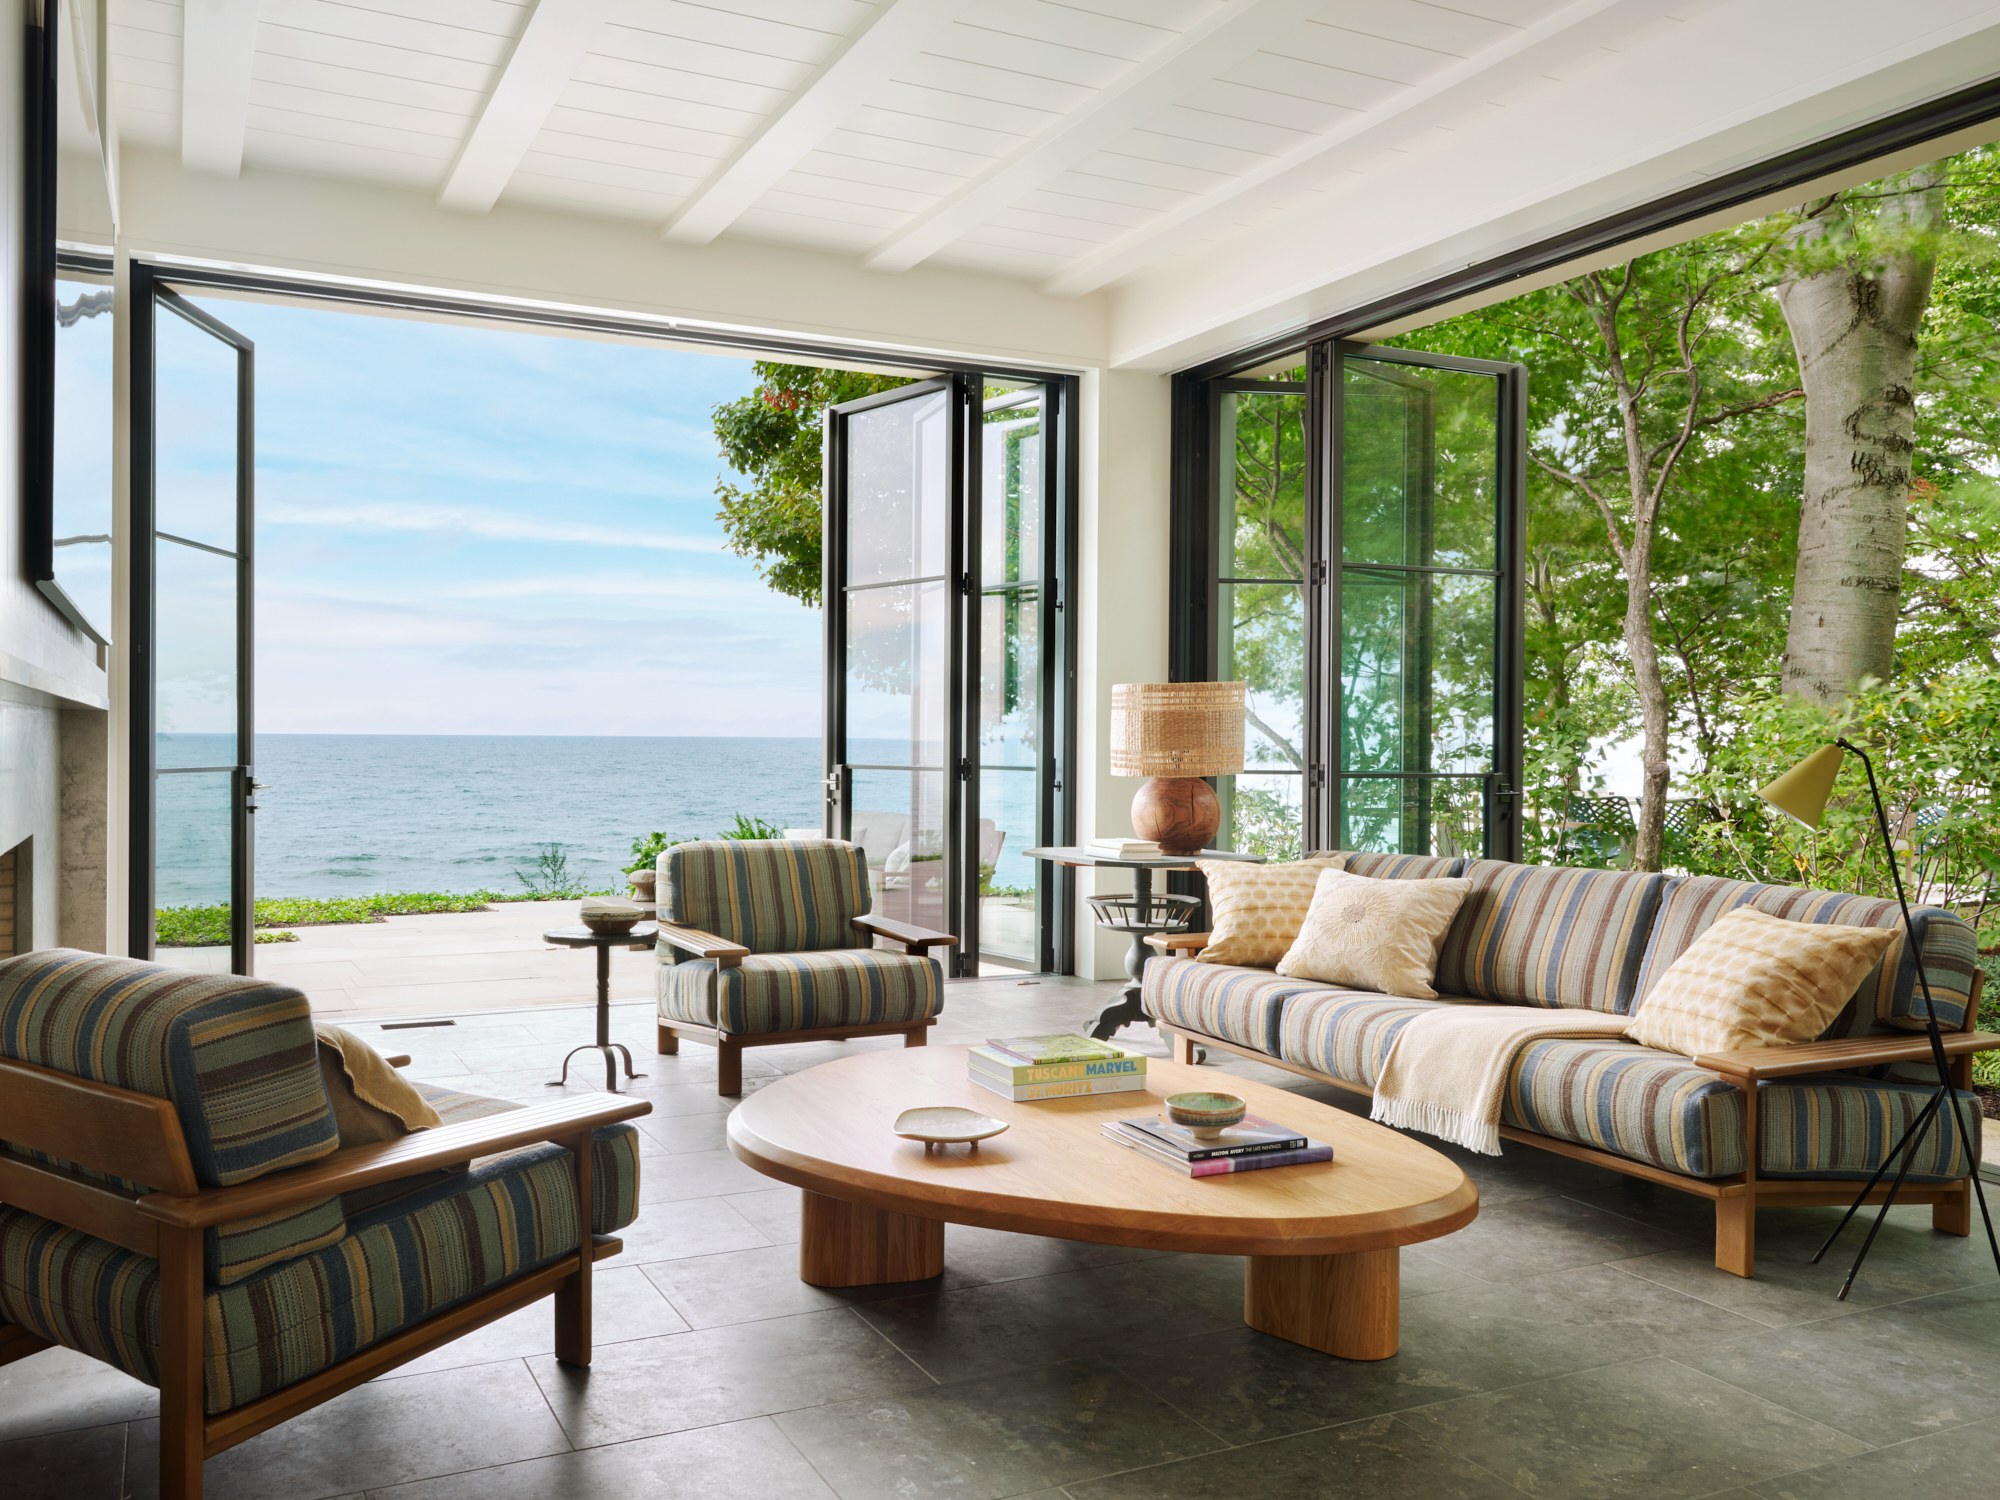 Lake Michigan property by architect and designer Celeste Robbins in Effect Magazine